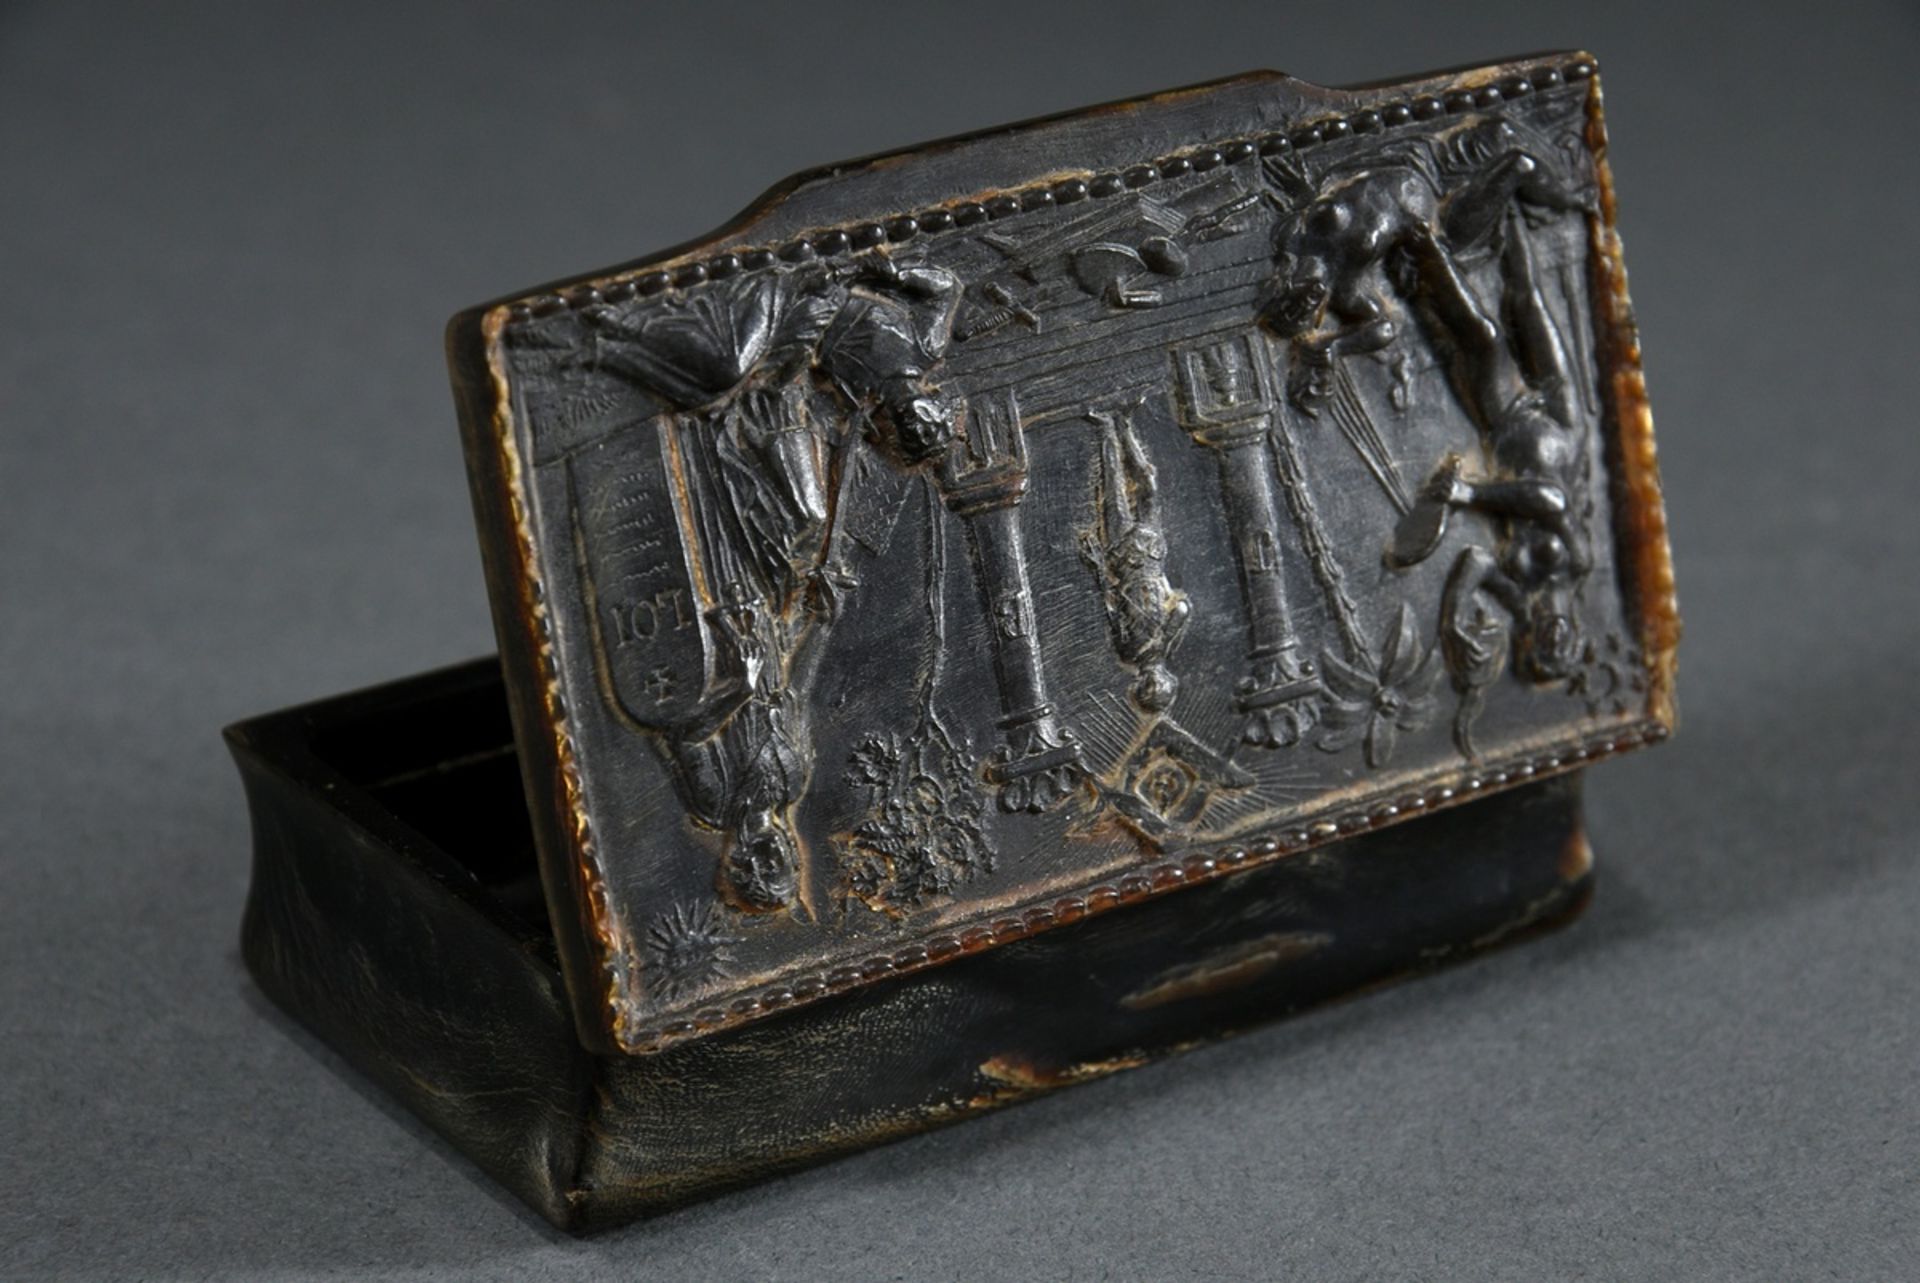 Freemason tabatiere of horn with pressed symbolism and allegory on the lid, end of 18th c., 8,5x4,5 - Image 3 of 6